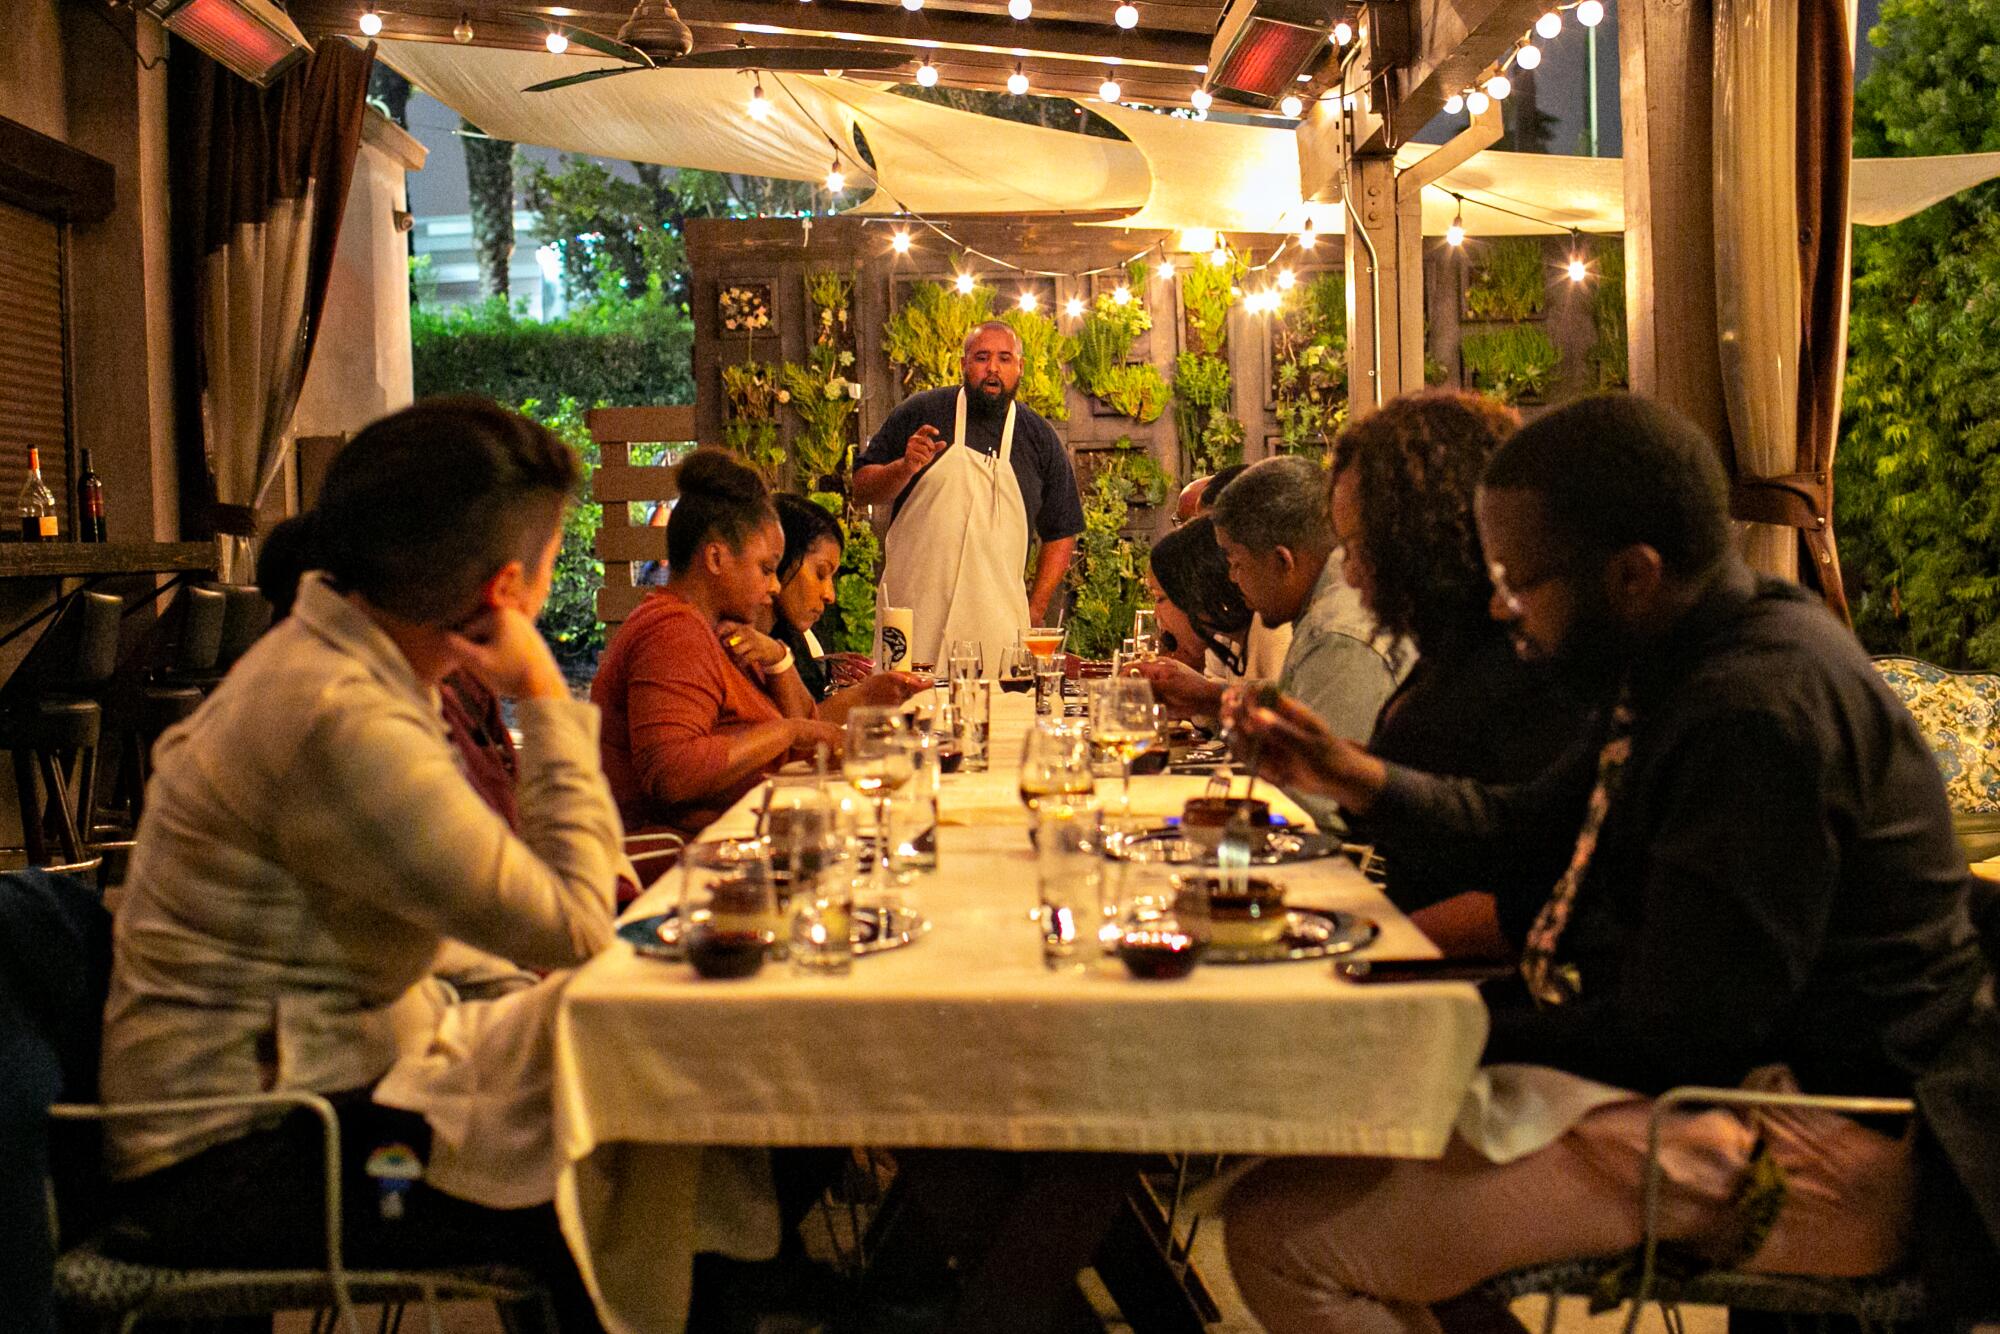 A chef stands before seated guests at a table, discussing a meal.